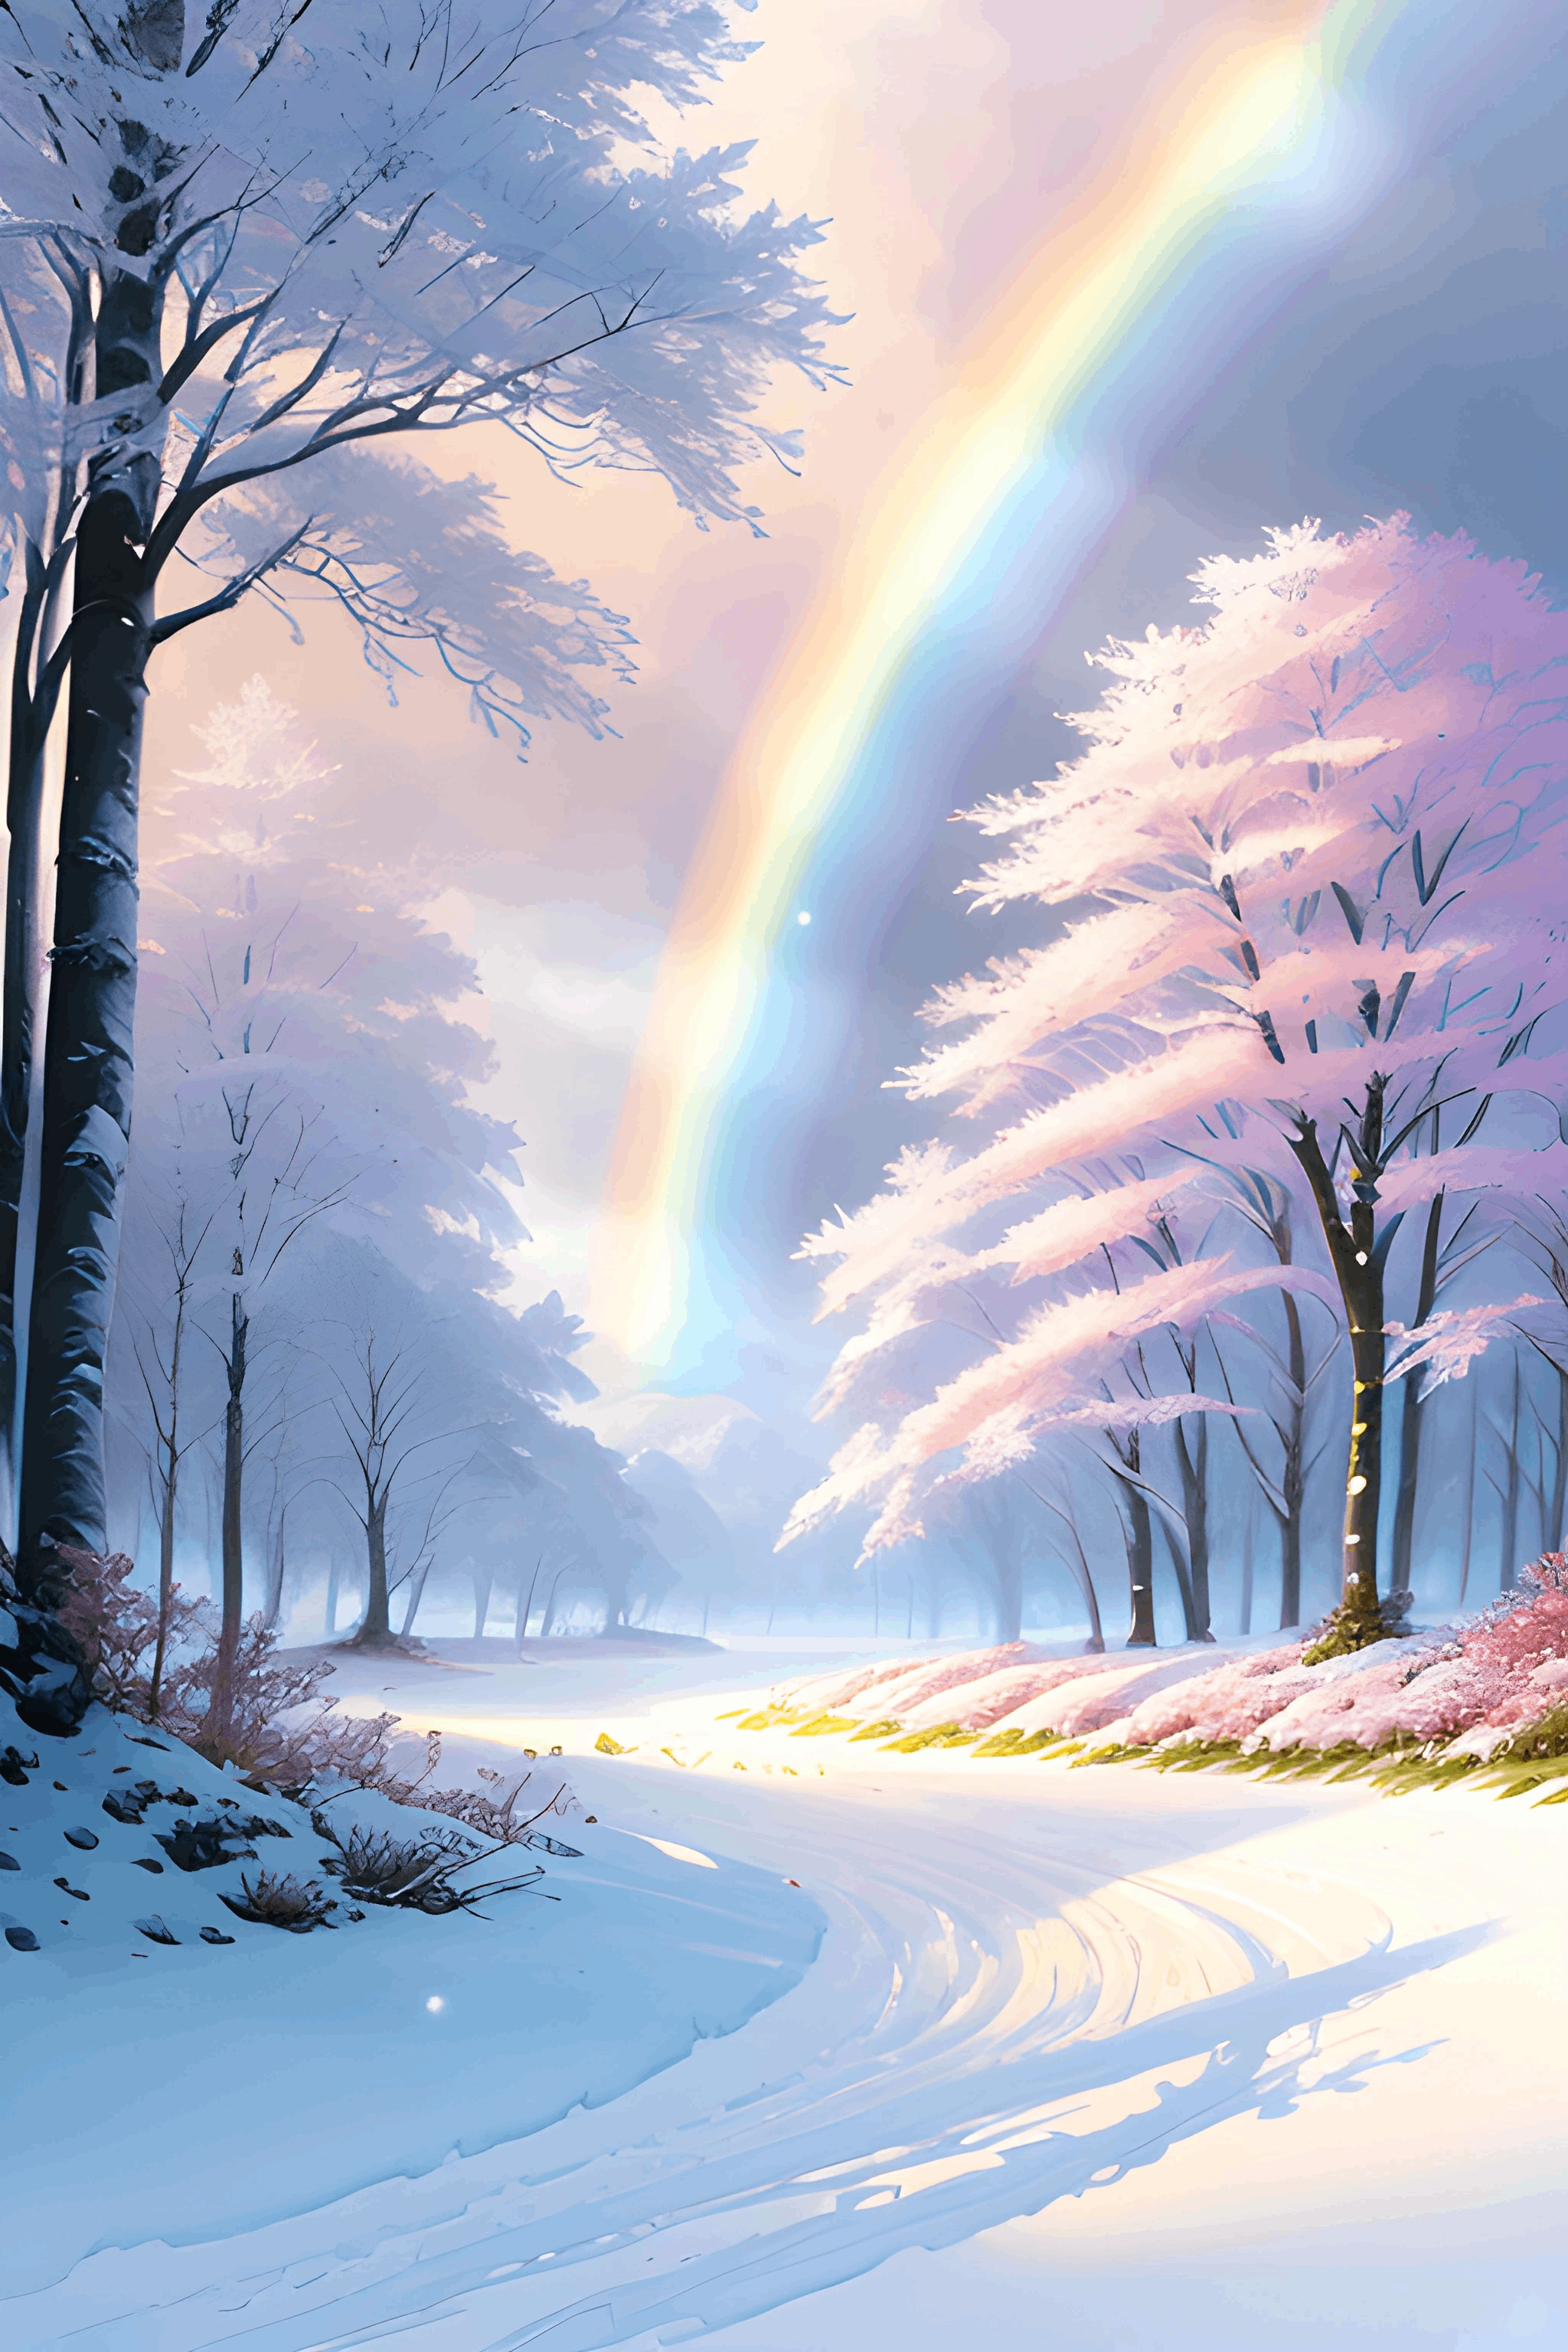 painting of a rainbow in a snowy forest with a rainbow in the sky